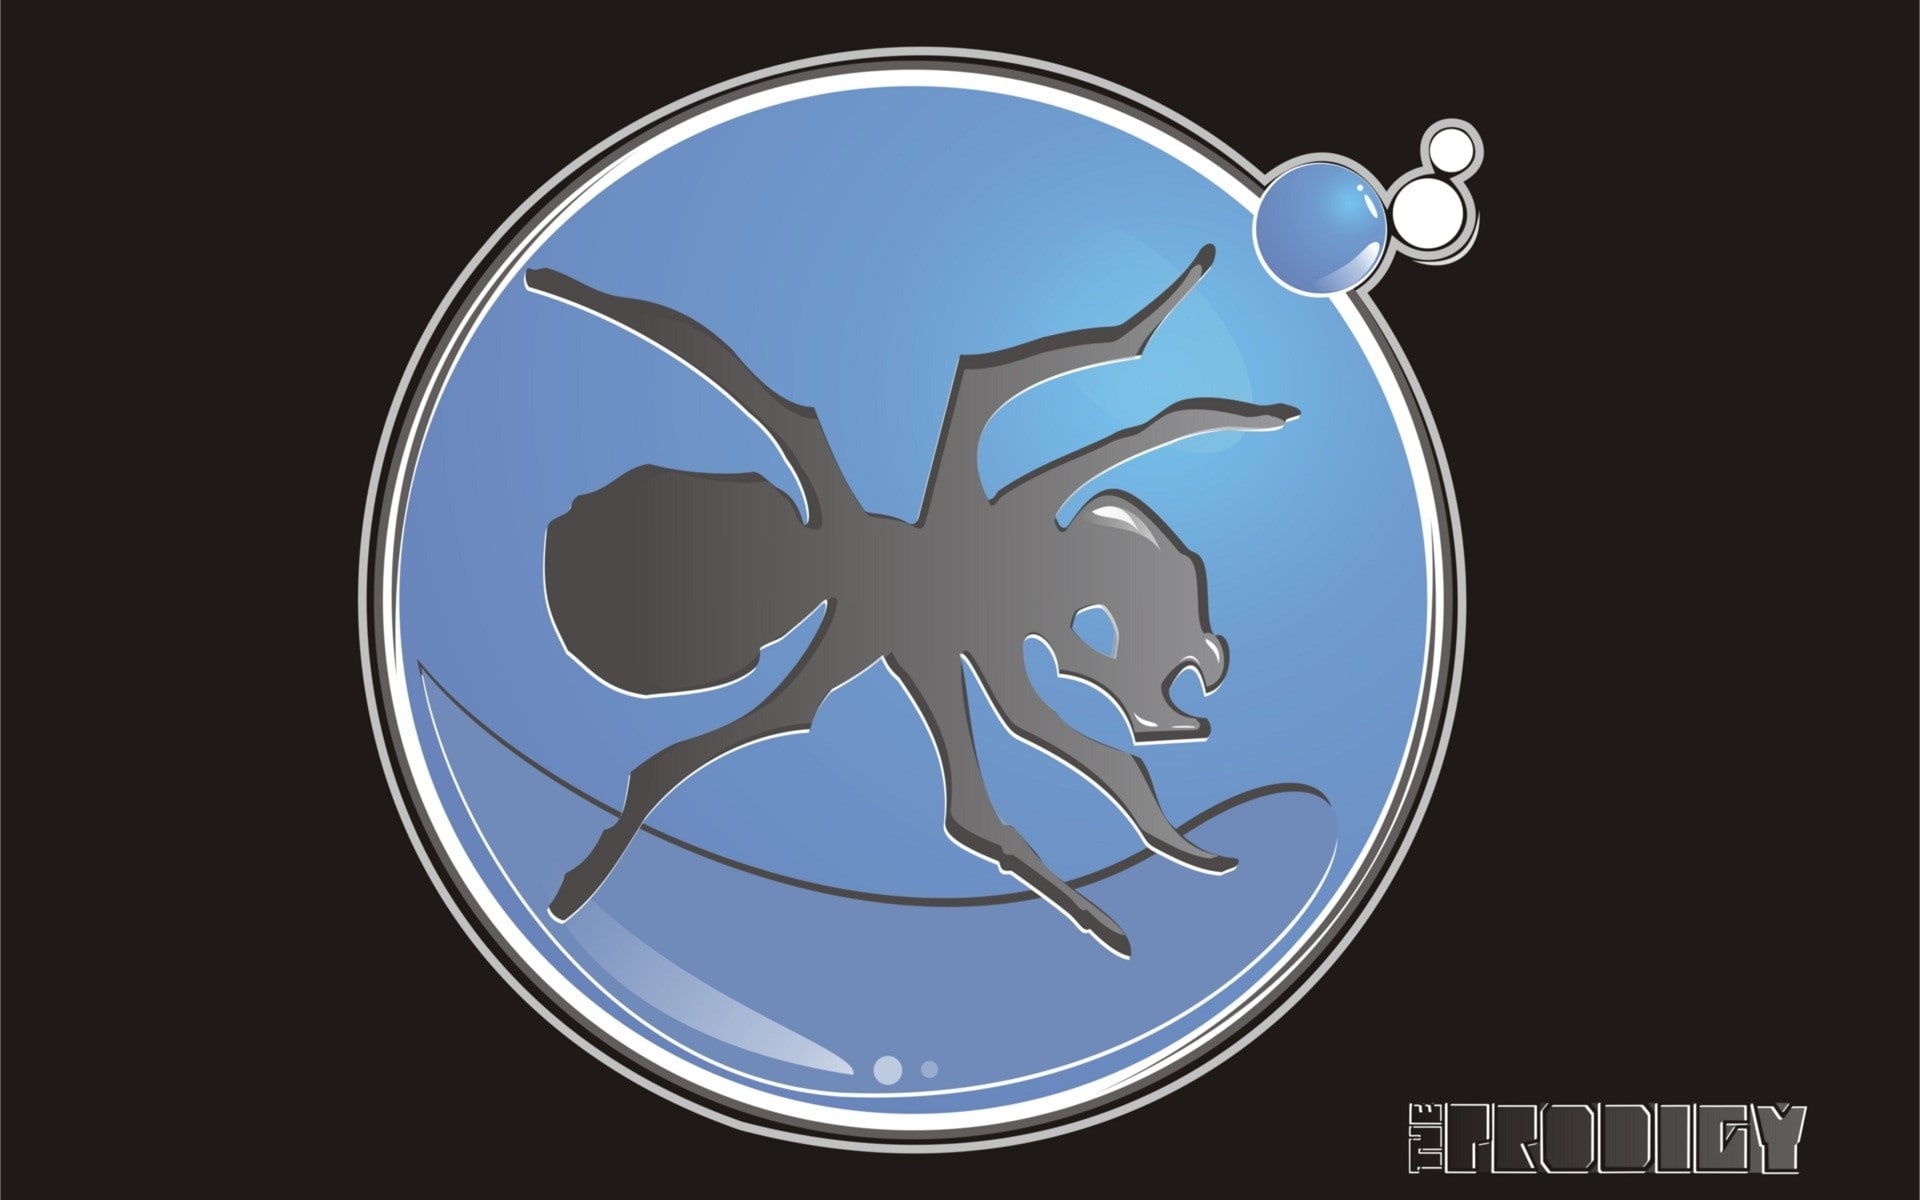 The prodigy, Ant, Circle, Name, Background, sky, animal, star - space